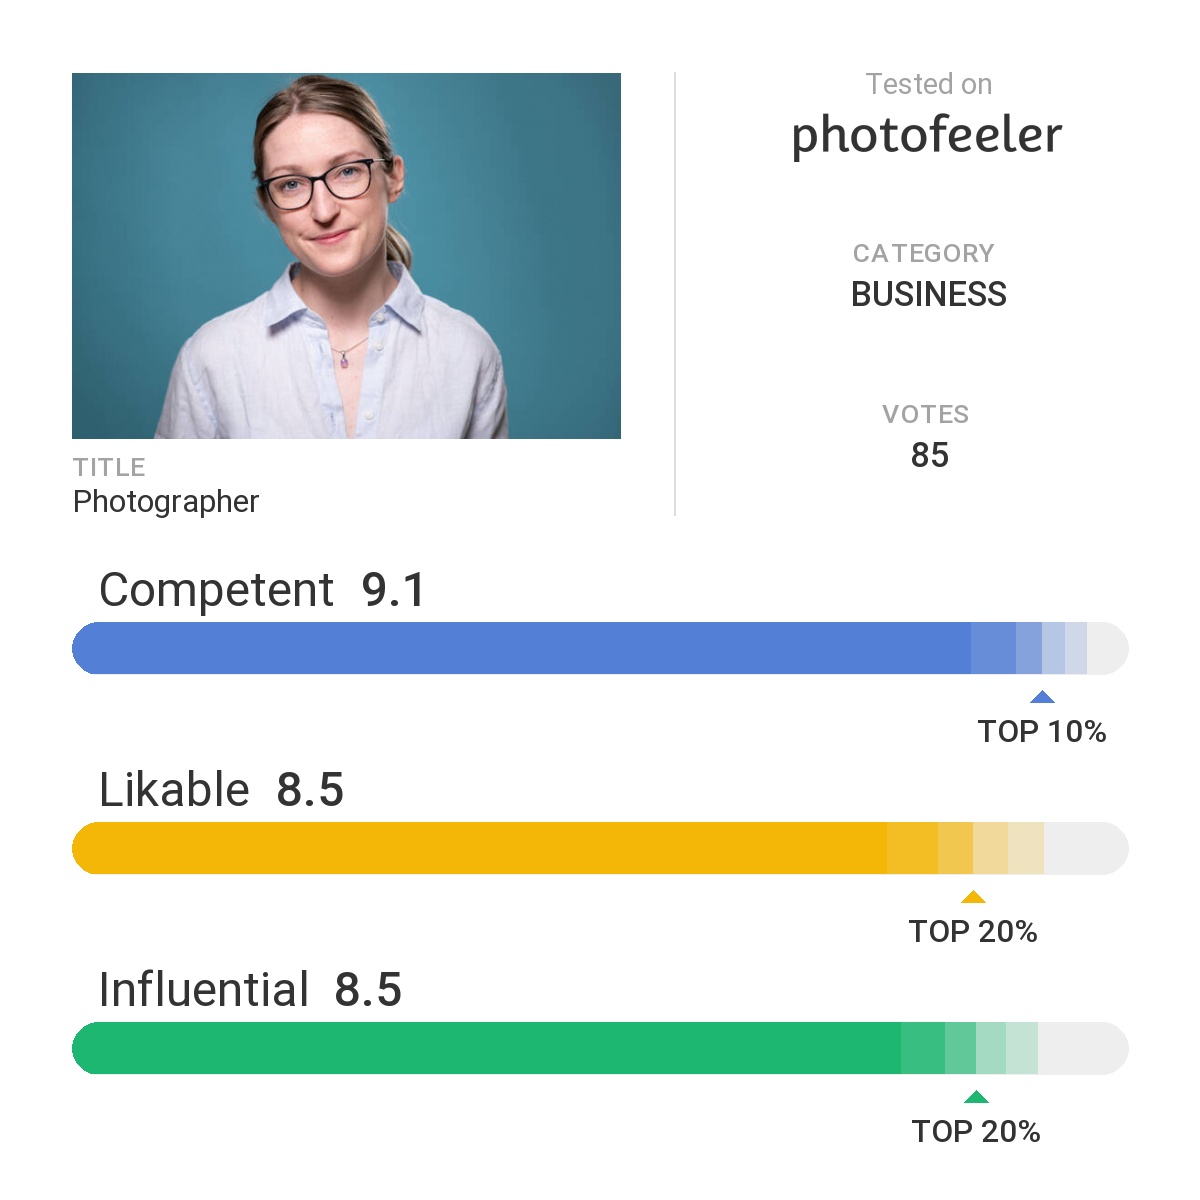 An image from Photofeeler showing the results from a professional headshot: Competency at 9.1, likeability at 8.5, and influence at 8.5.